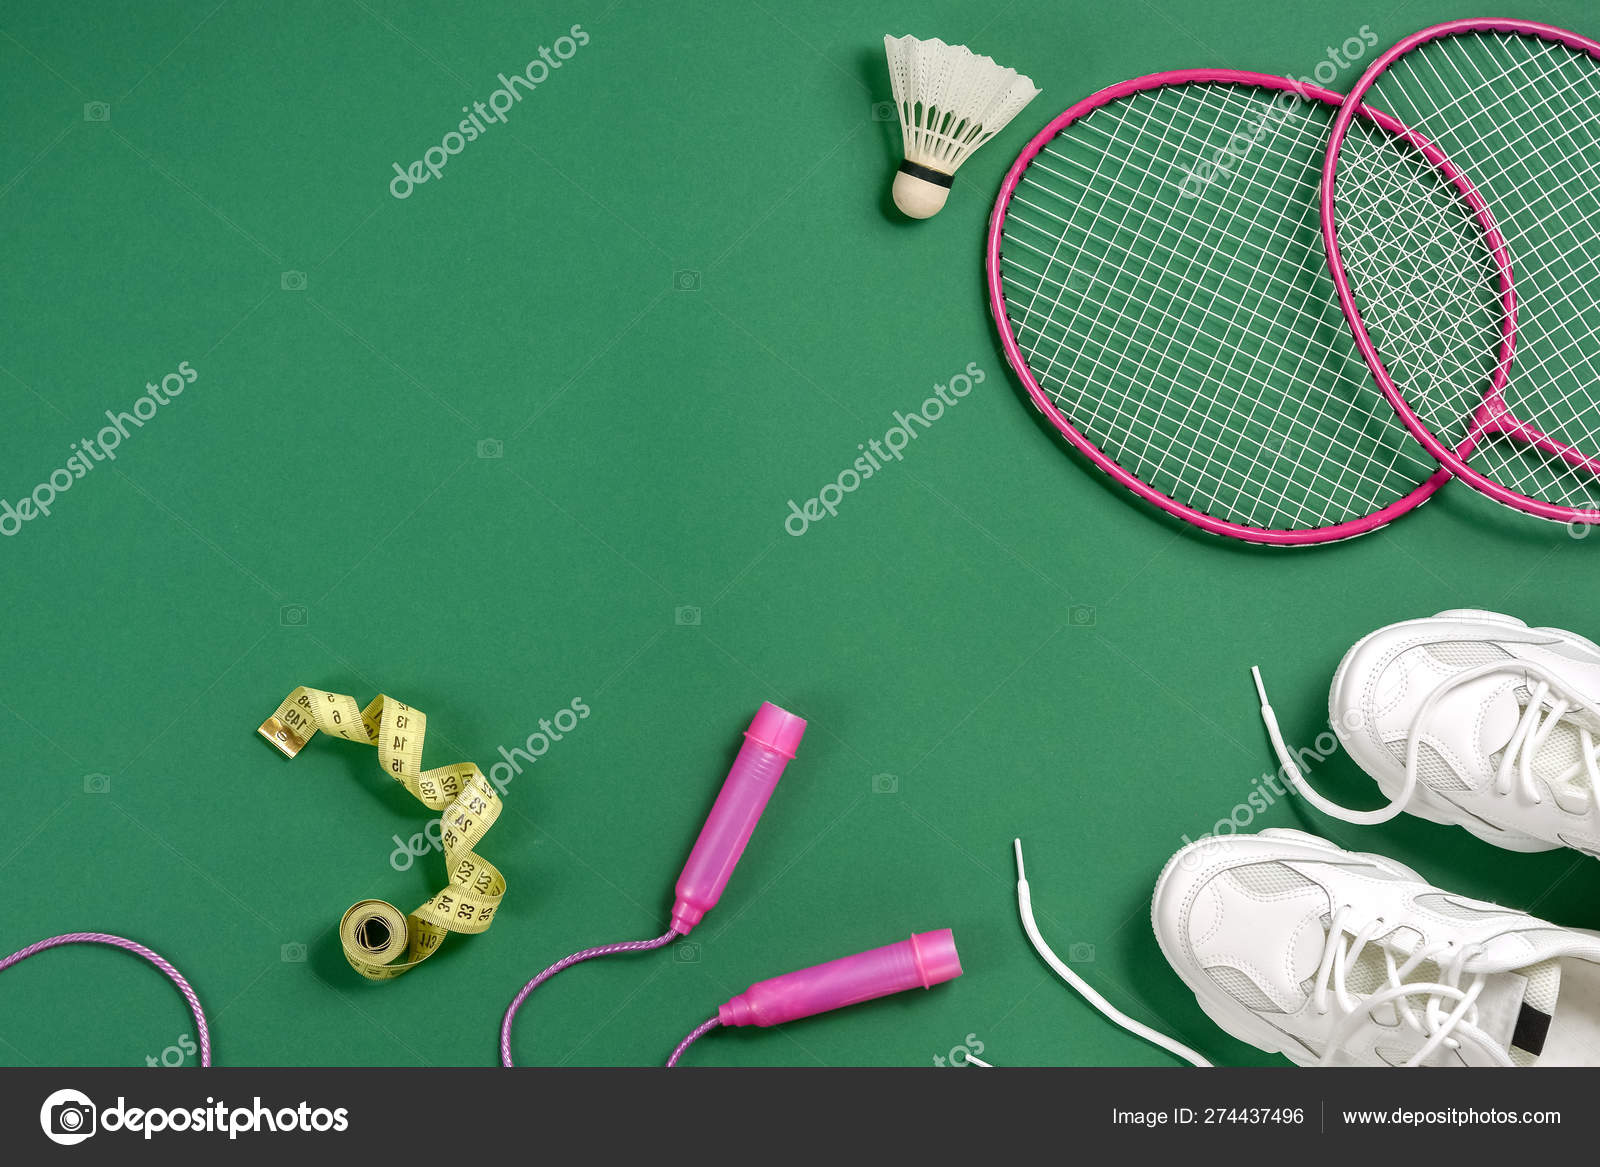 Sports flat lay with shuttlecock and badminton racket, skipping rope,  sneakers and measuring tape on green background. Fitness, sport and healthy  lifestyle concept. Stock Photo by ©JuraJarema 274437496